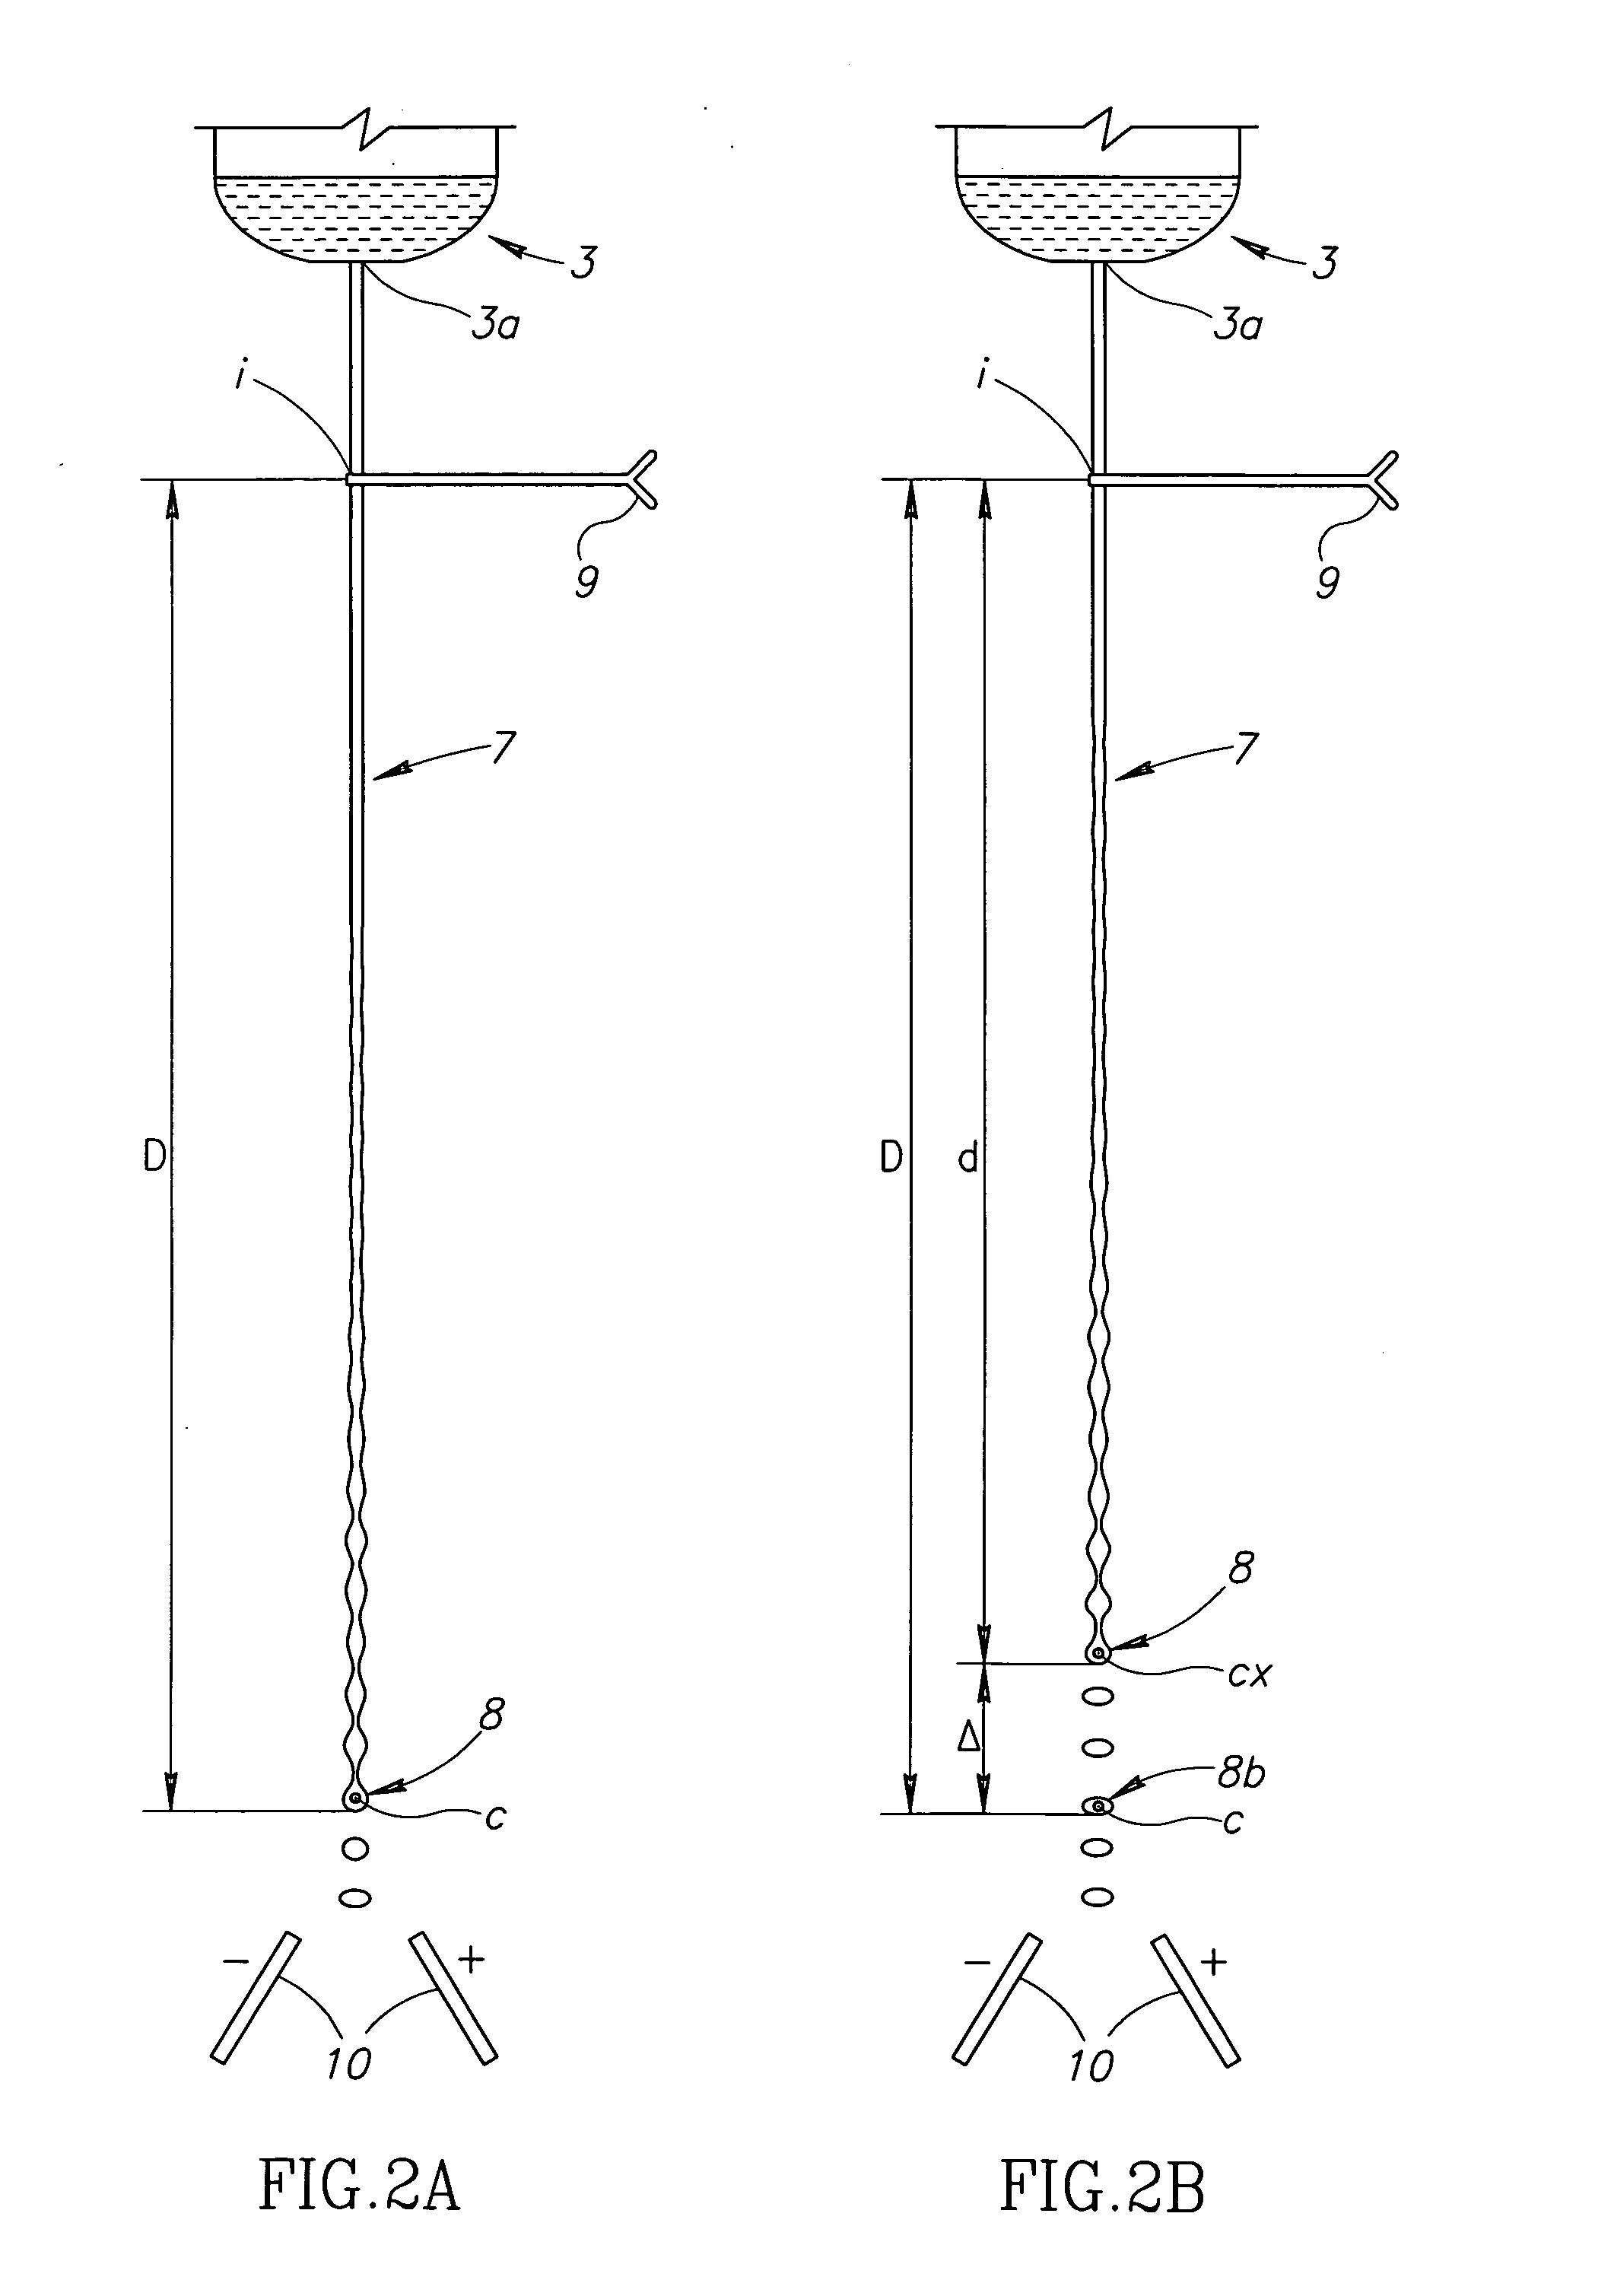 Fluid delivery system for a flow cytometer